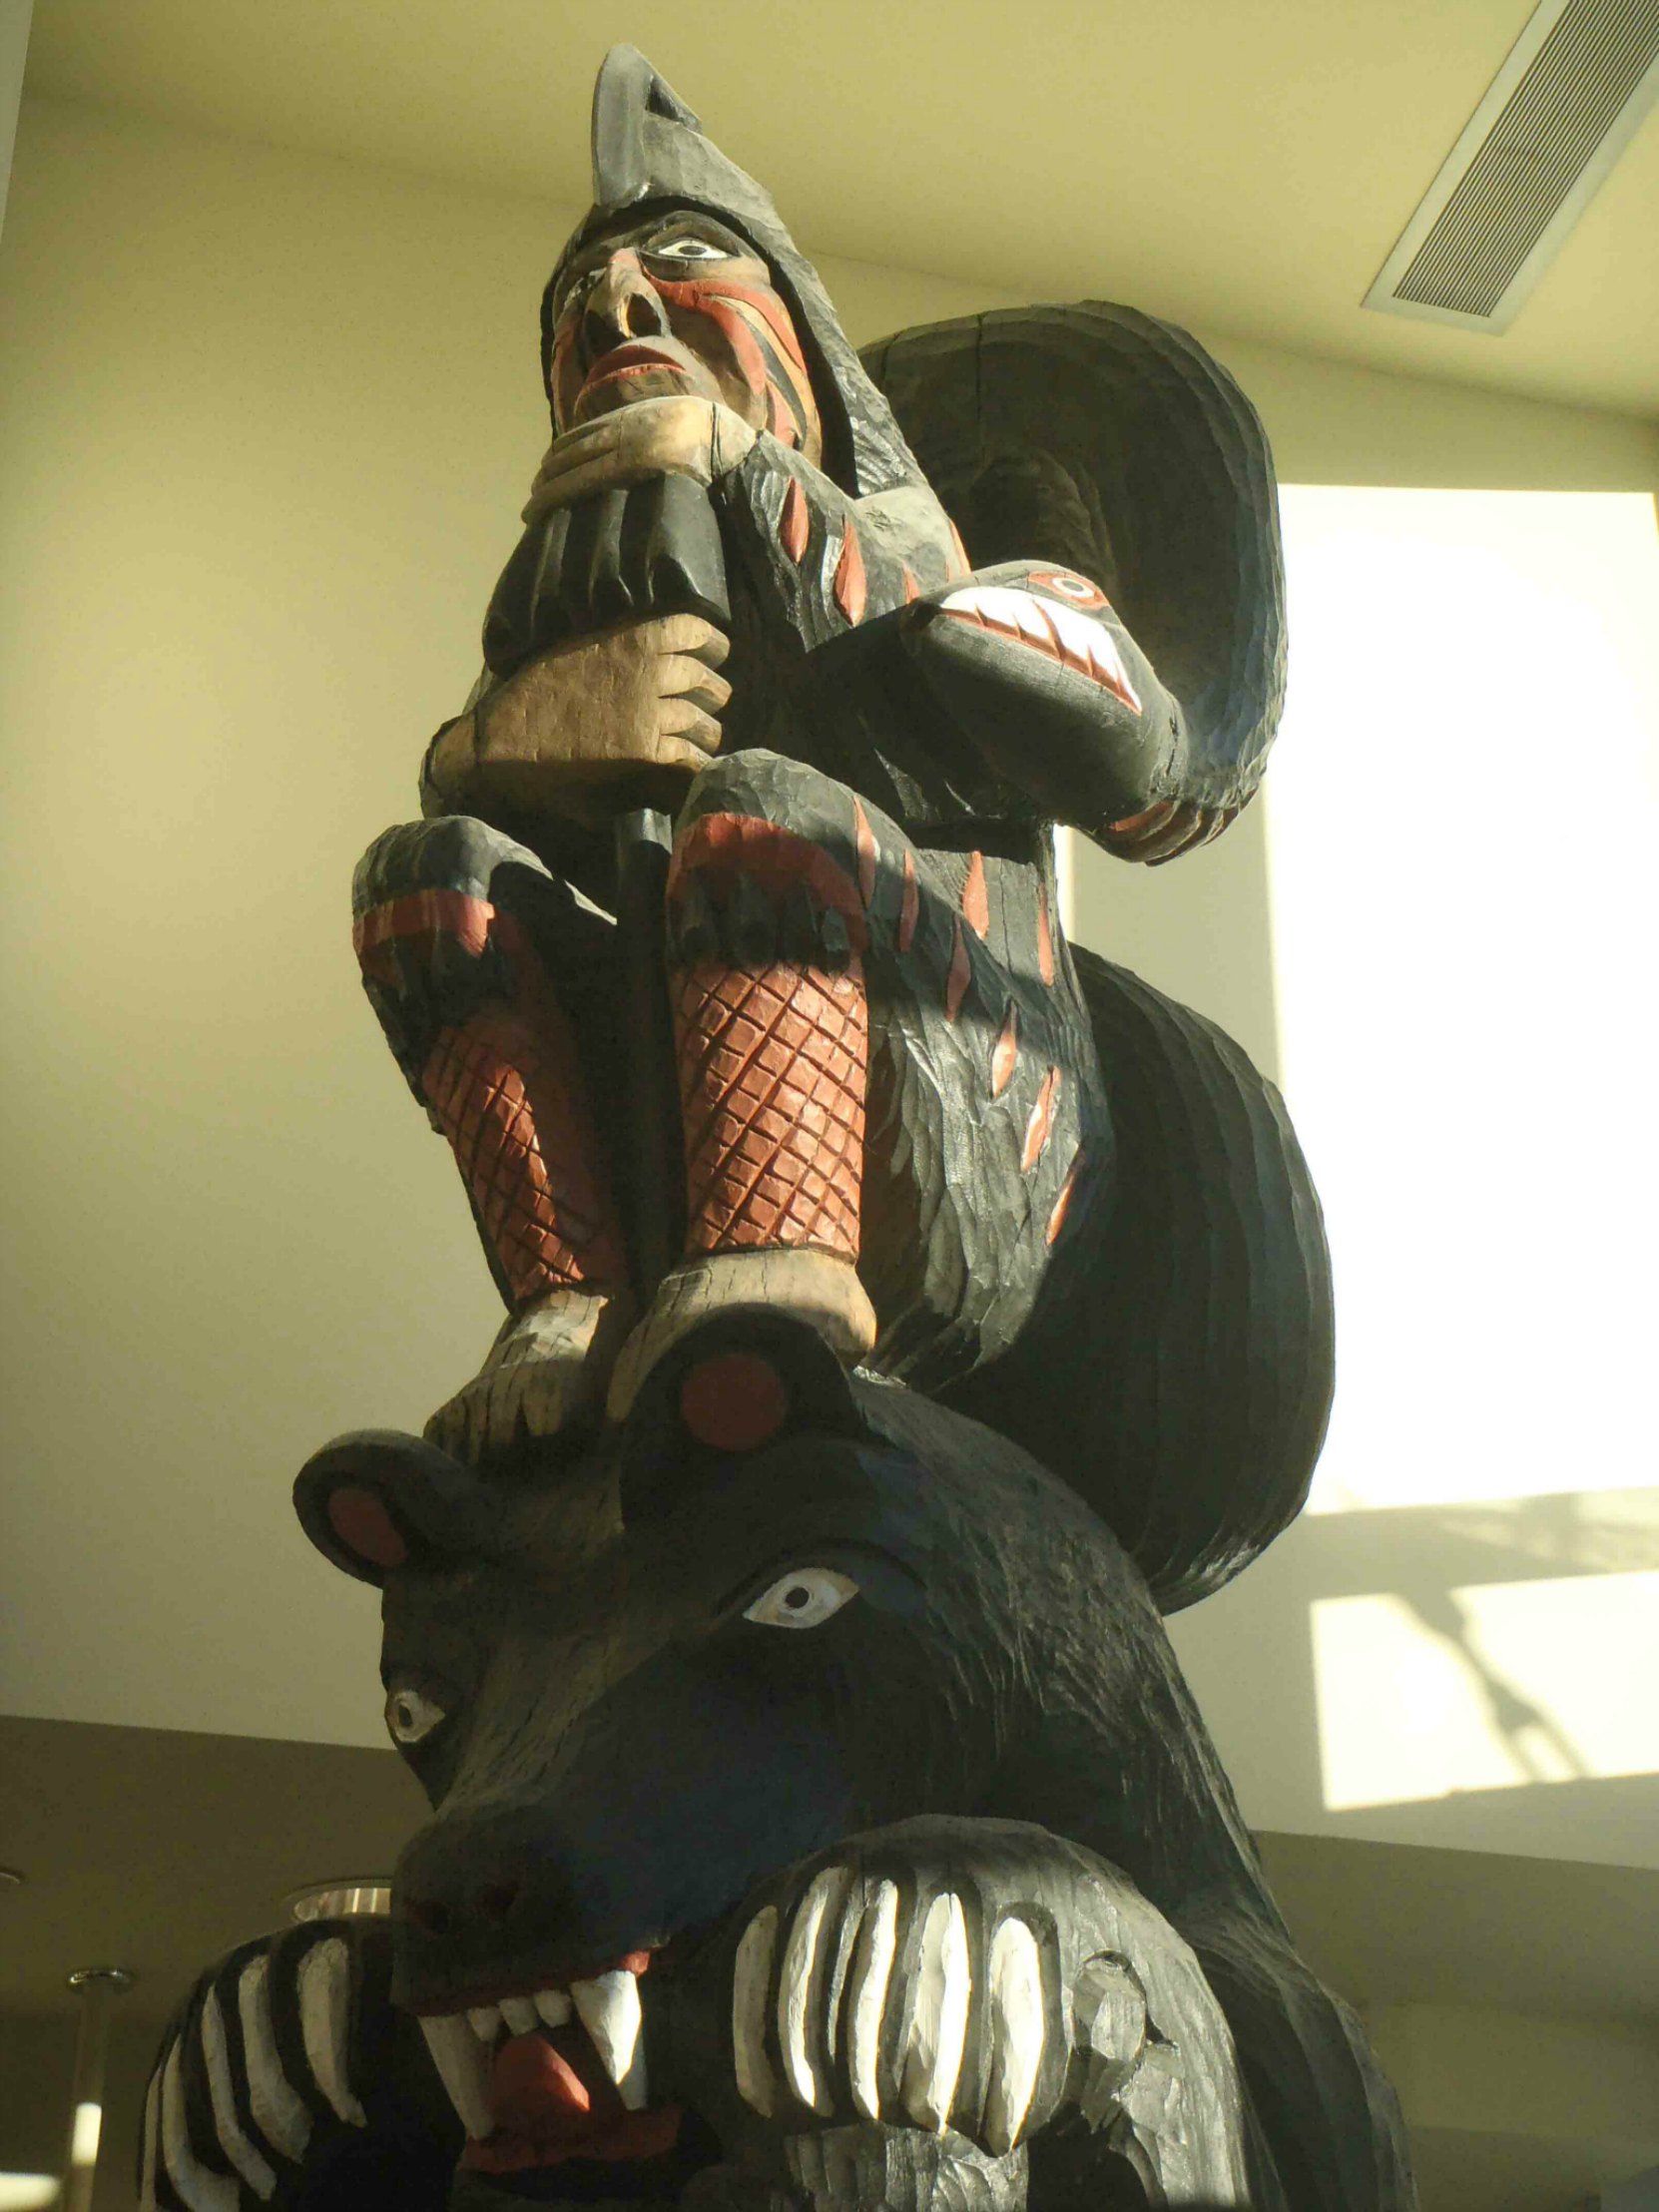 Provincial Route of the Totems Salish Bear pole, Human figure, displayed in Vancouver Island Public Library, Cowichan Branch.